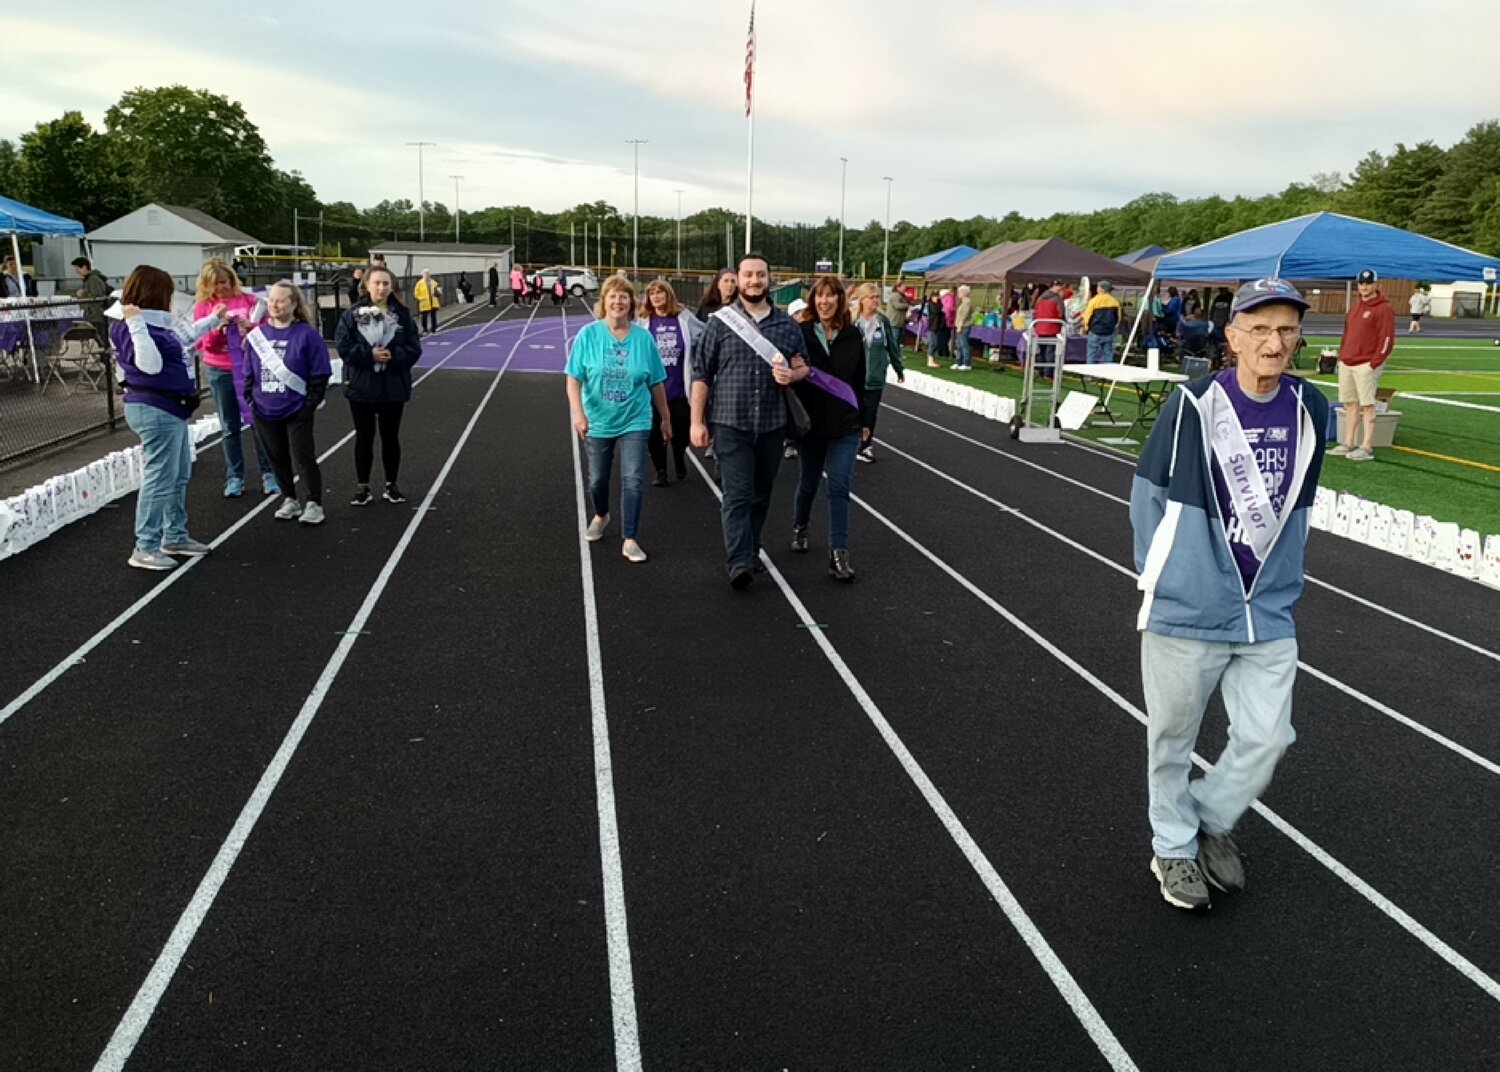 Survivors and their caregivers walk the track during the opening lap of the Relay For Life of Greater Attleboro.